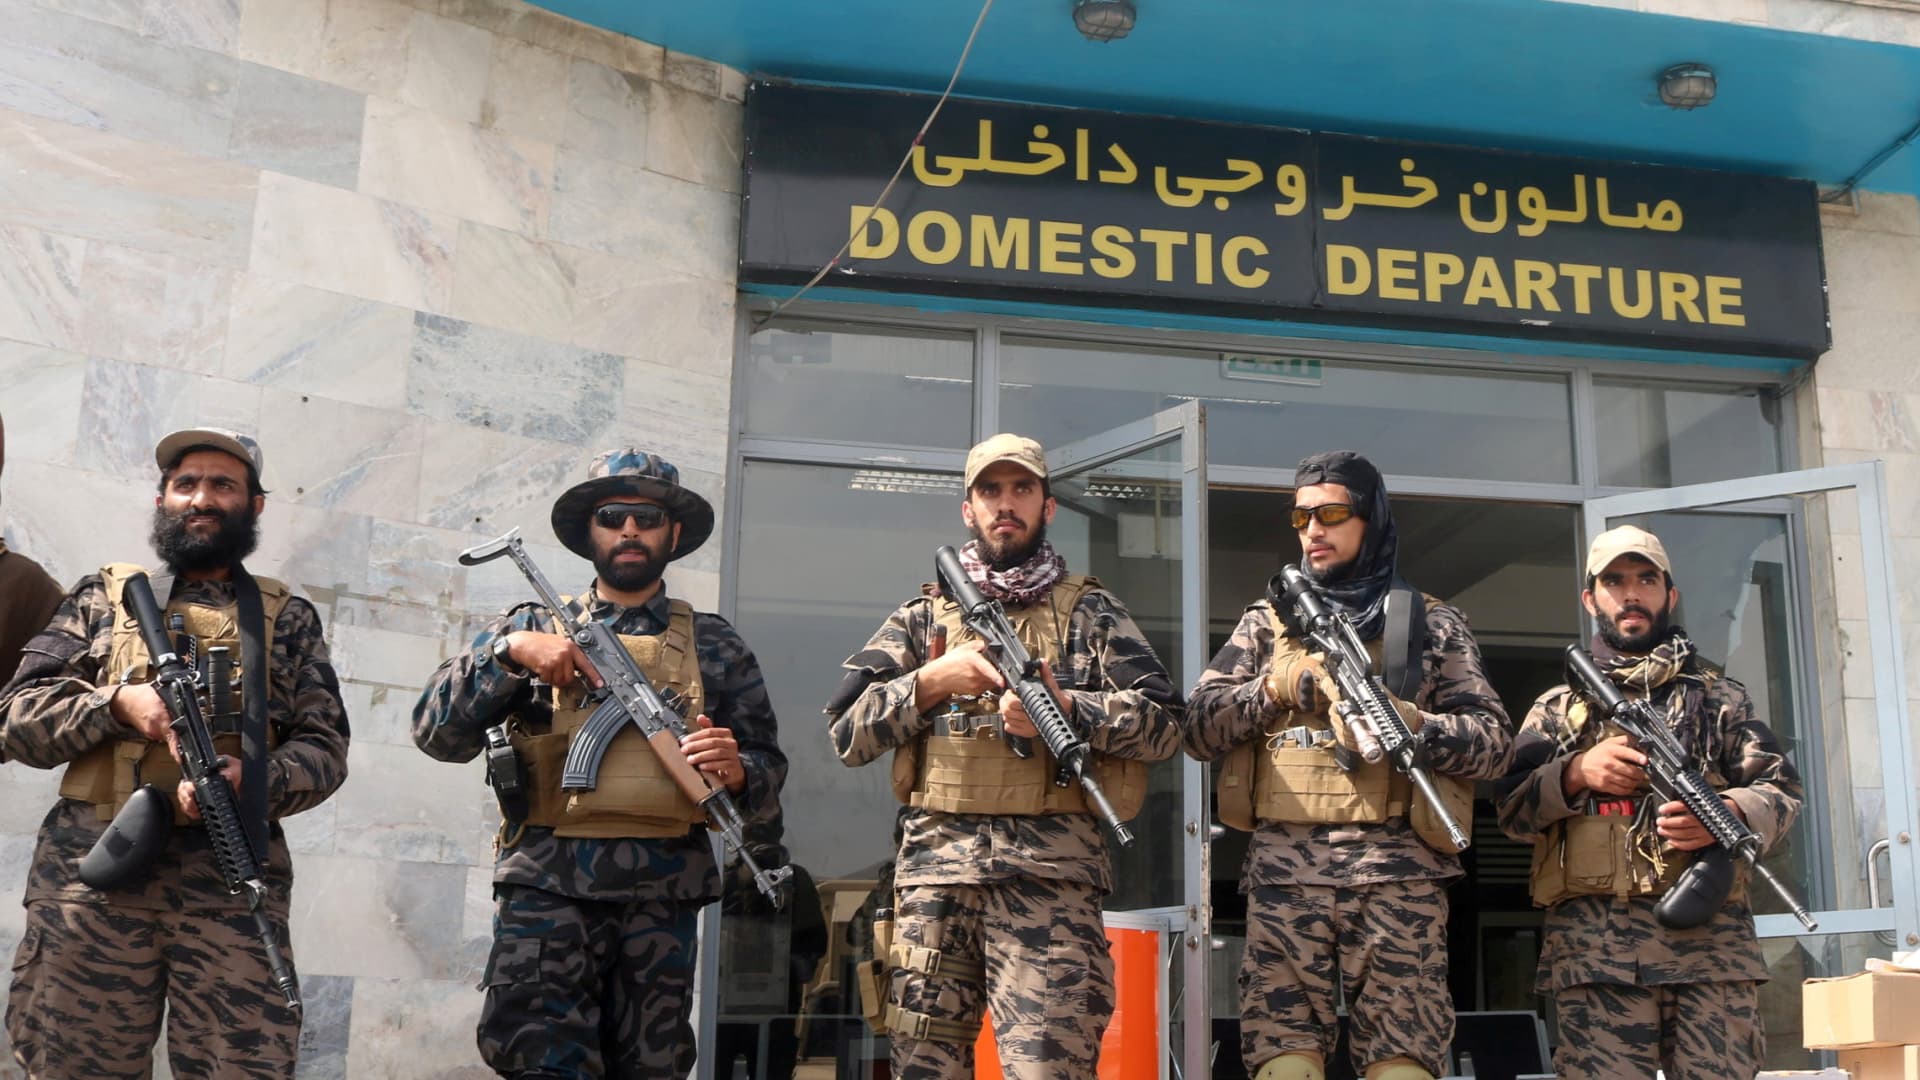 Taliban forces stand guard a day after the U.S. troops withdrawal from Hamid Karzai International Airport in Kabul, Afghanistan August 31, 2021.